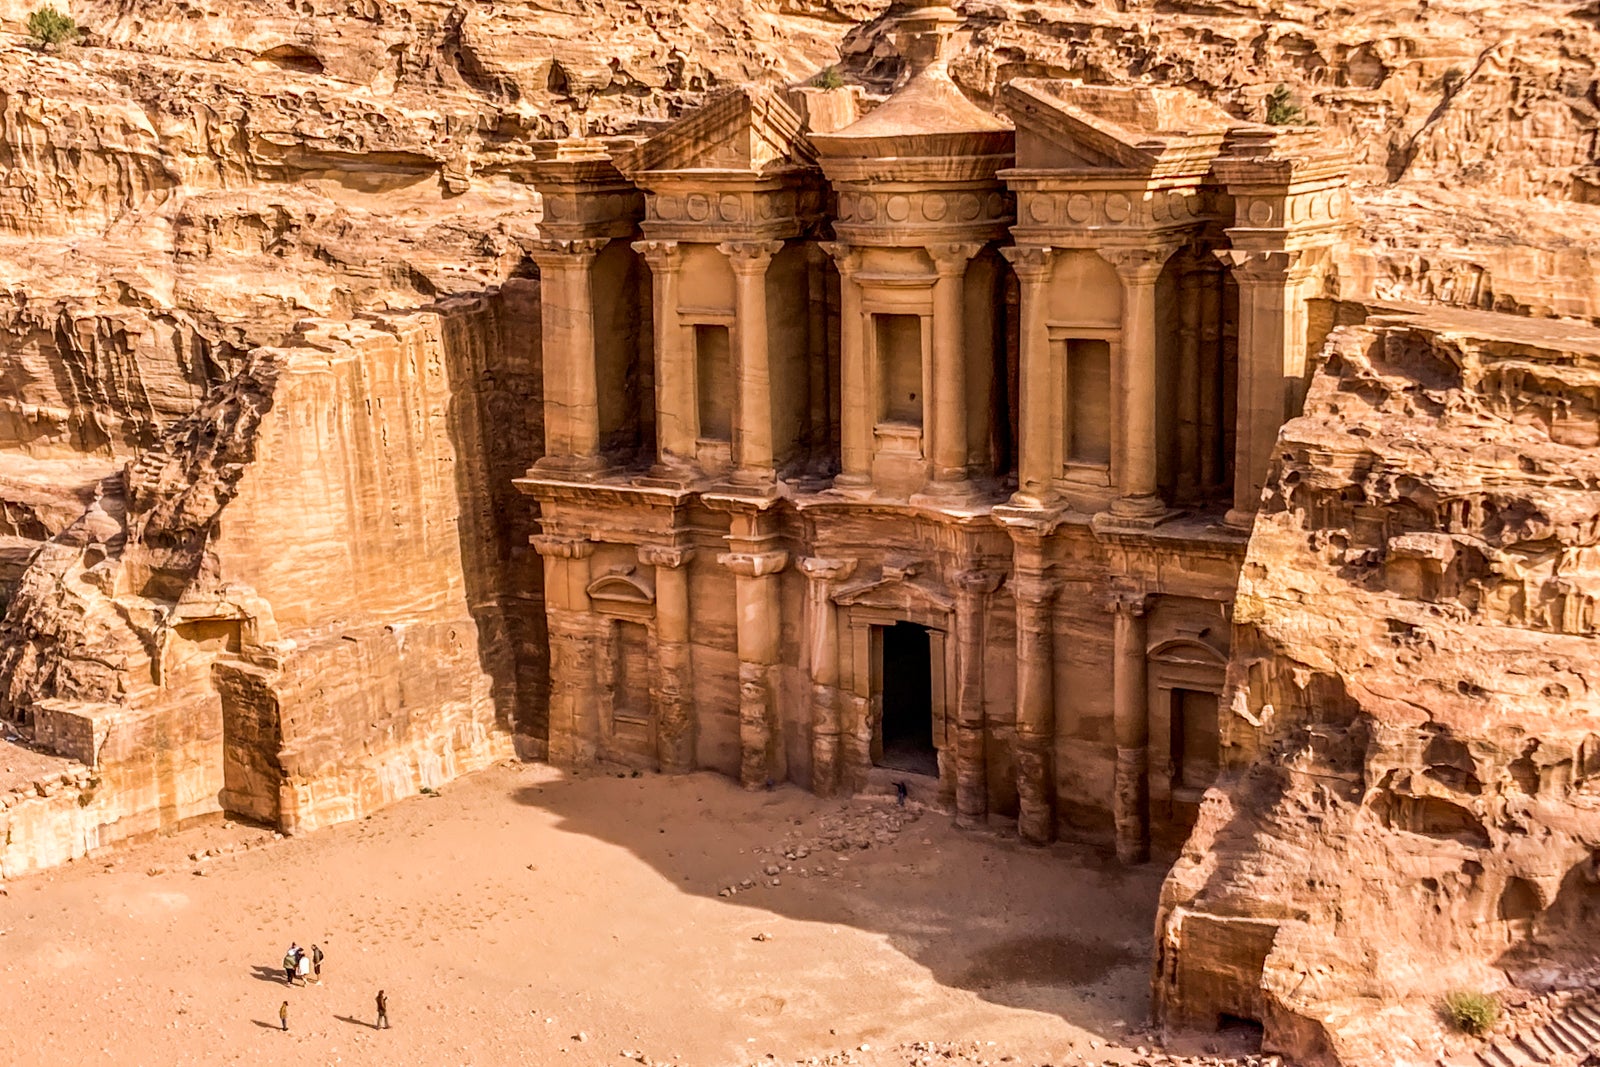 looking down at a monument at Petra, the UNESCO World Heritage site